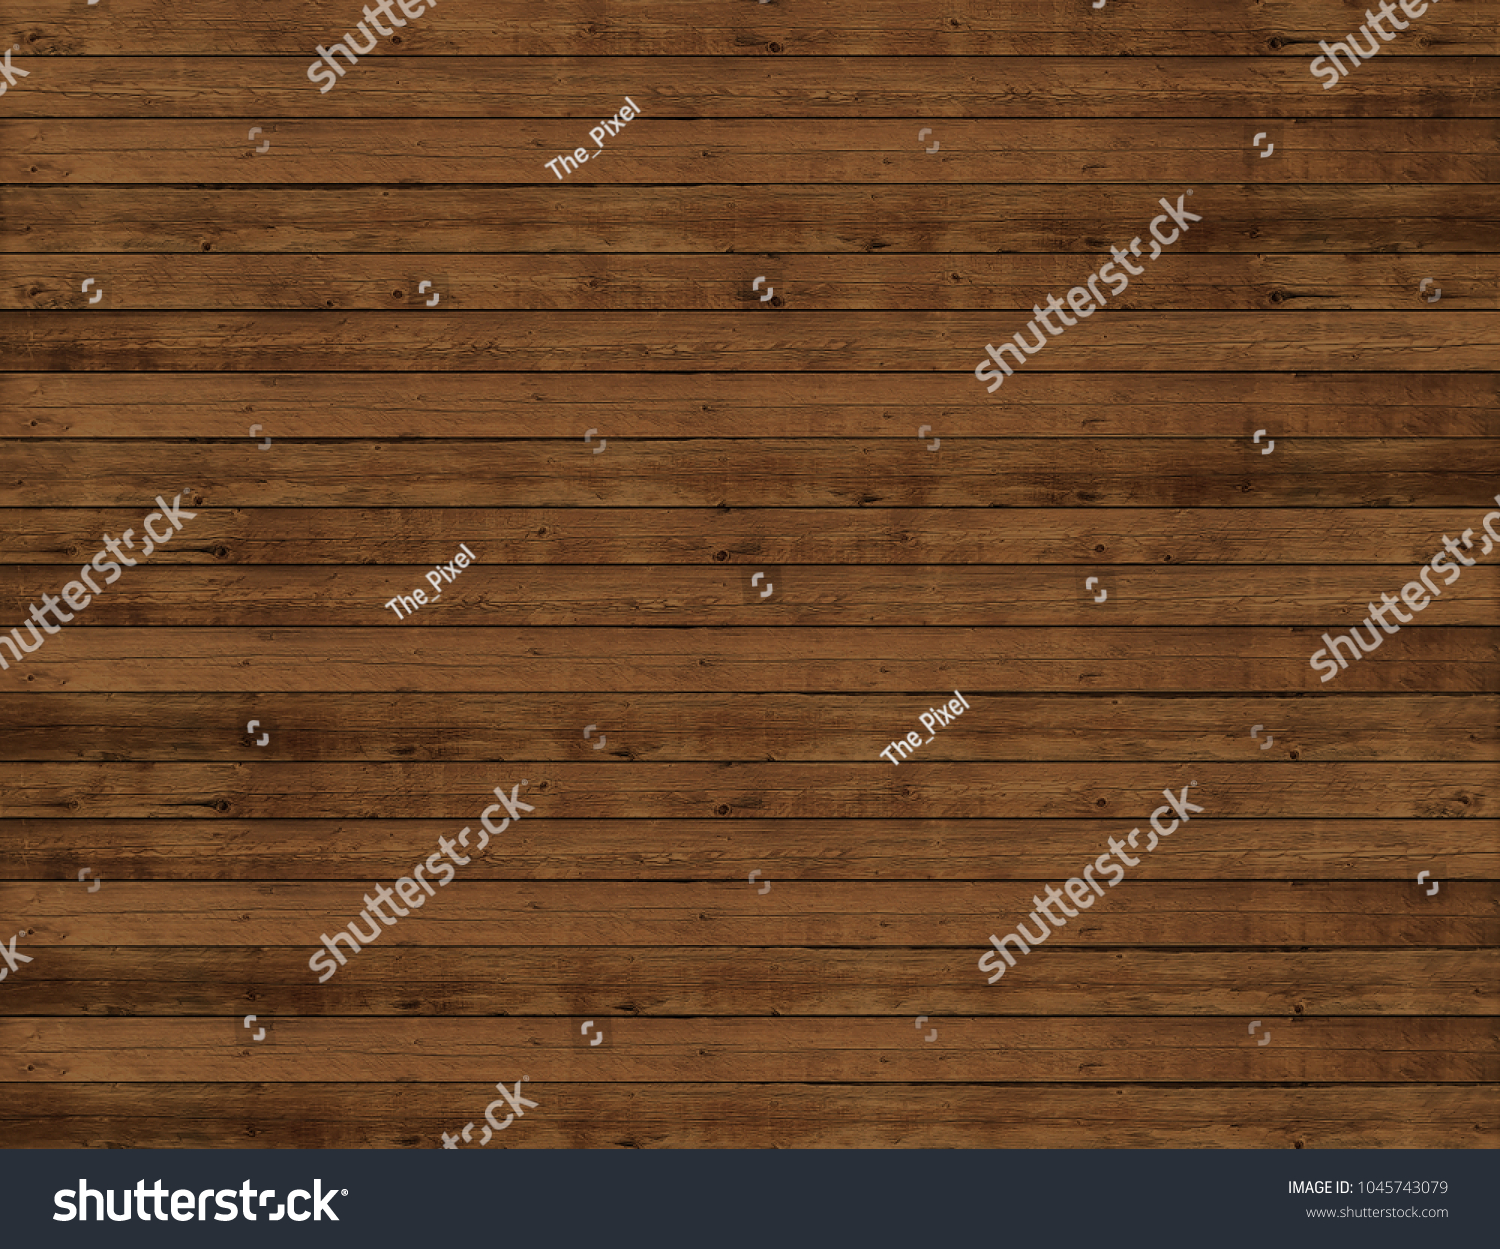 Wood plank brown texture background #1045743079